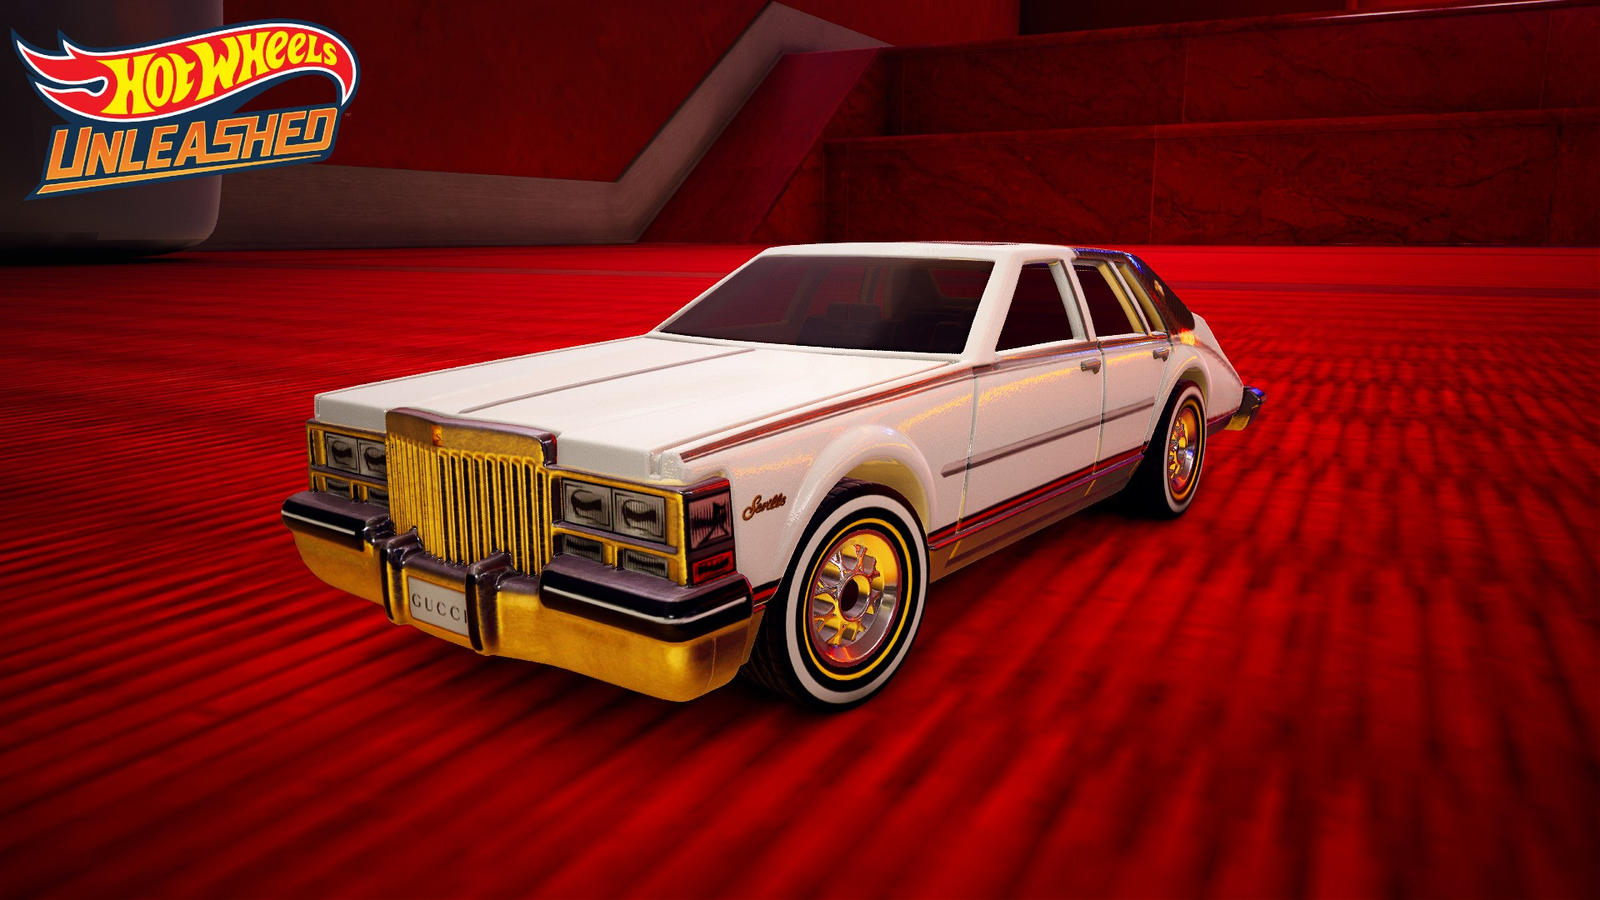 Hot Wheels Unleashed - Cadillac Seville by Gucci by SpeedBumpV-Drop on  DeviantArt